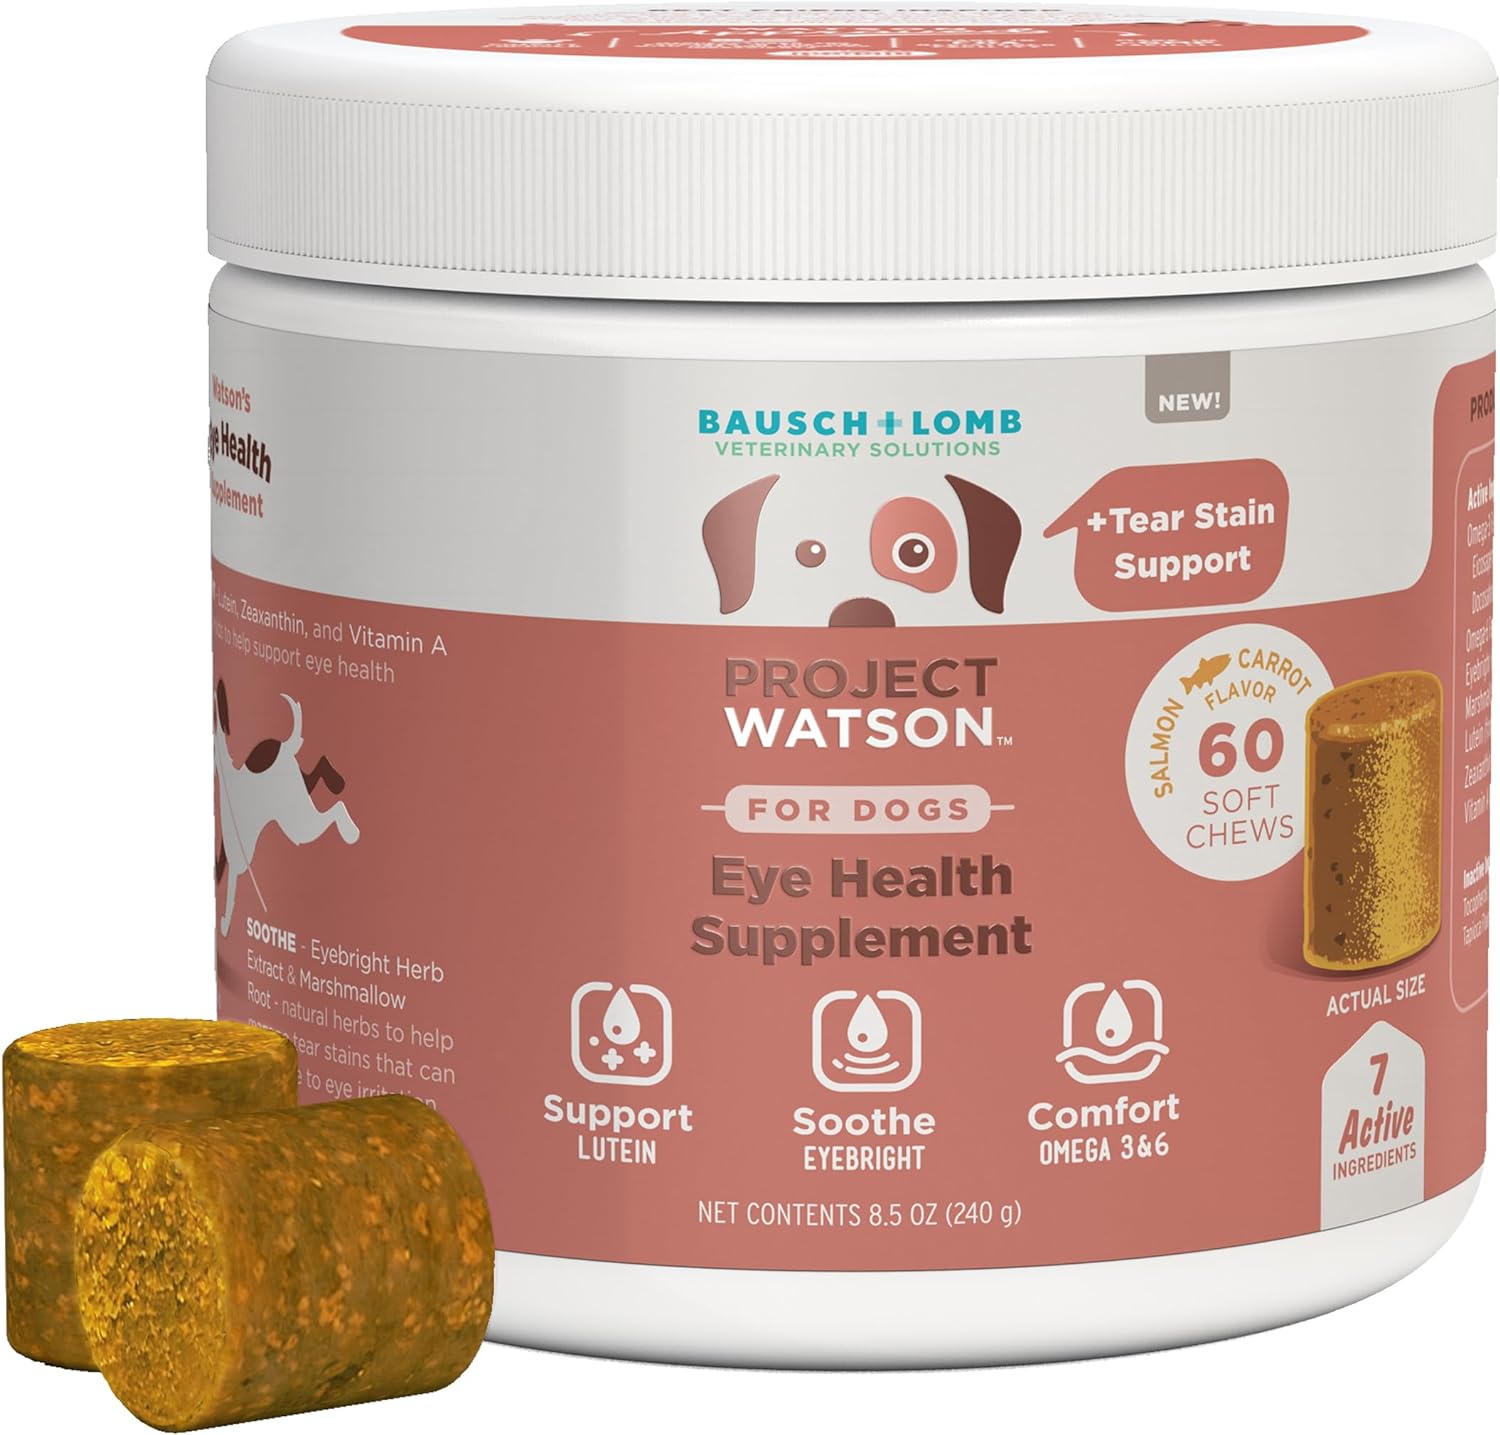 Bausch + Lomb Project Watson Dog Supplement, Contains Omega-3, Omega-6, Lutein, Zeaxanthin, and Vitamin A, Eyebright Herb Extract & Marshmallow Root to Help Reduce Eye Irritation, 60 Soft Chews